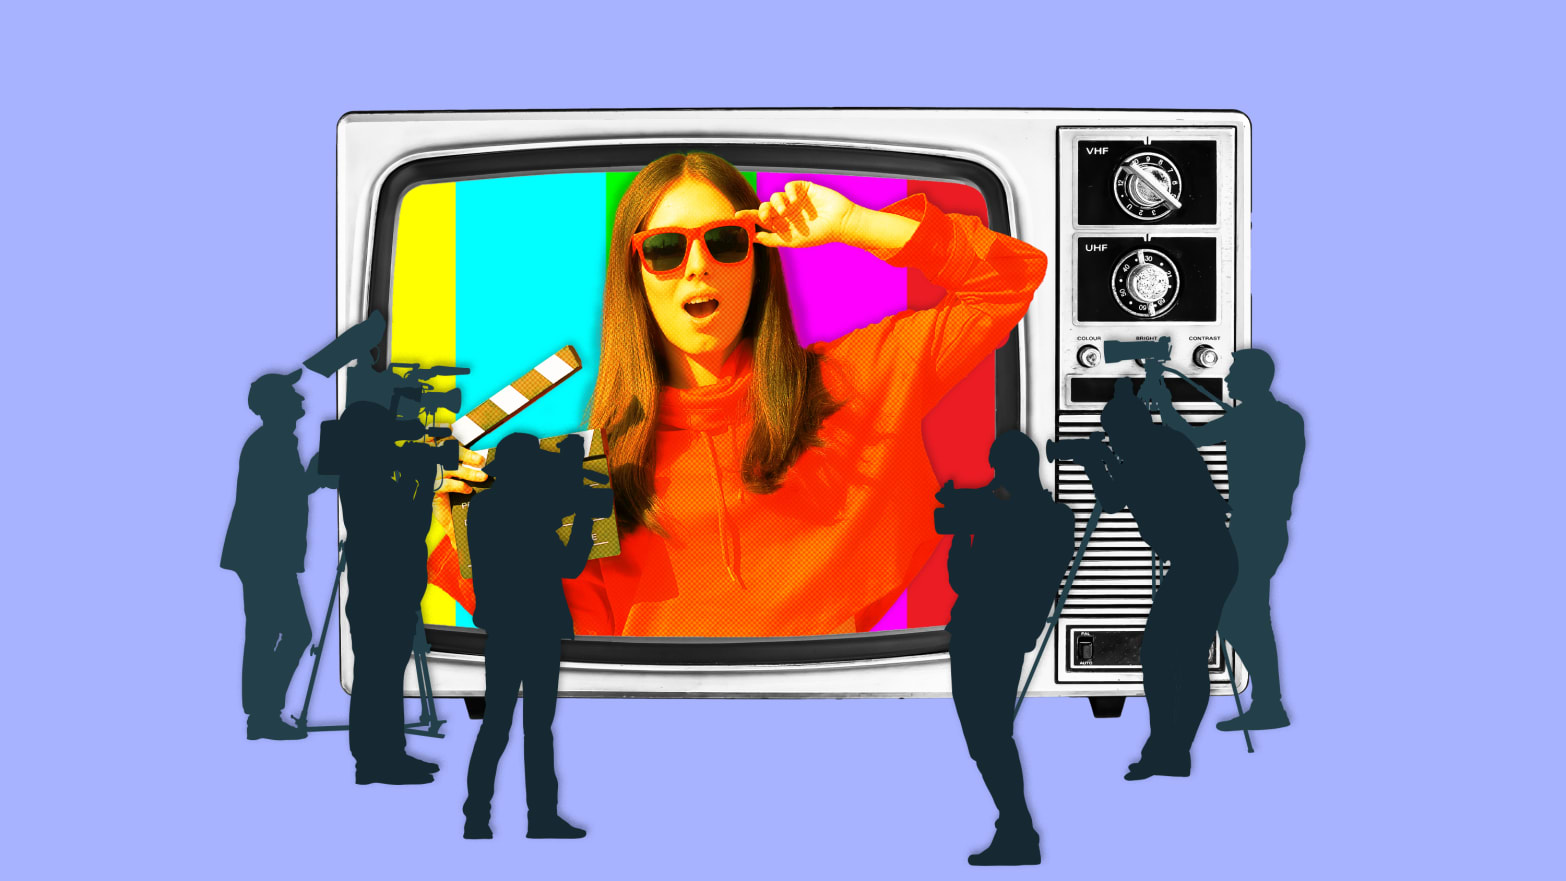 Photo illustration of a woman jumping out of a television in front of cameras